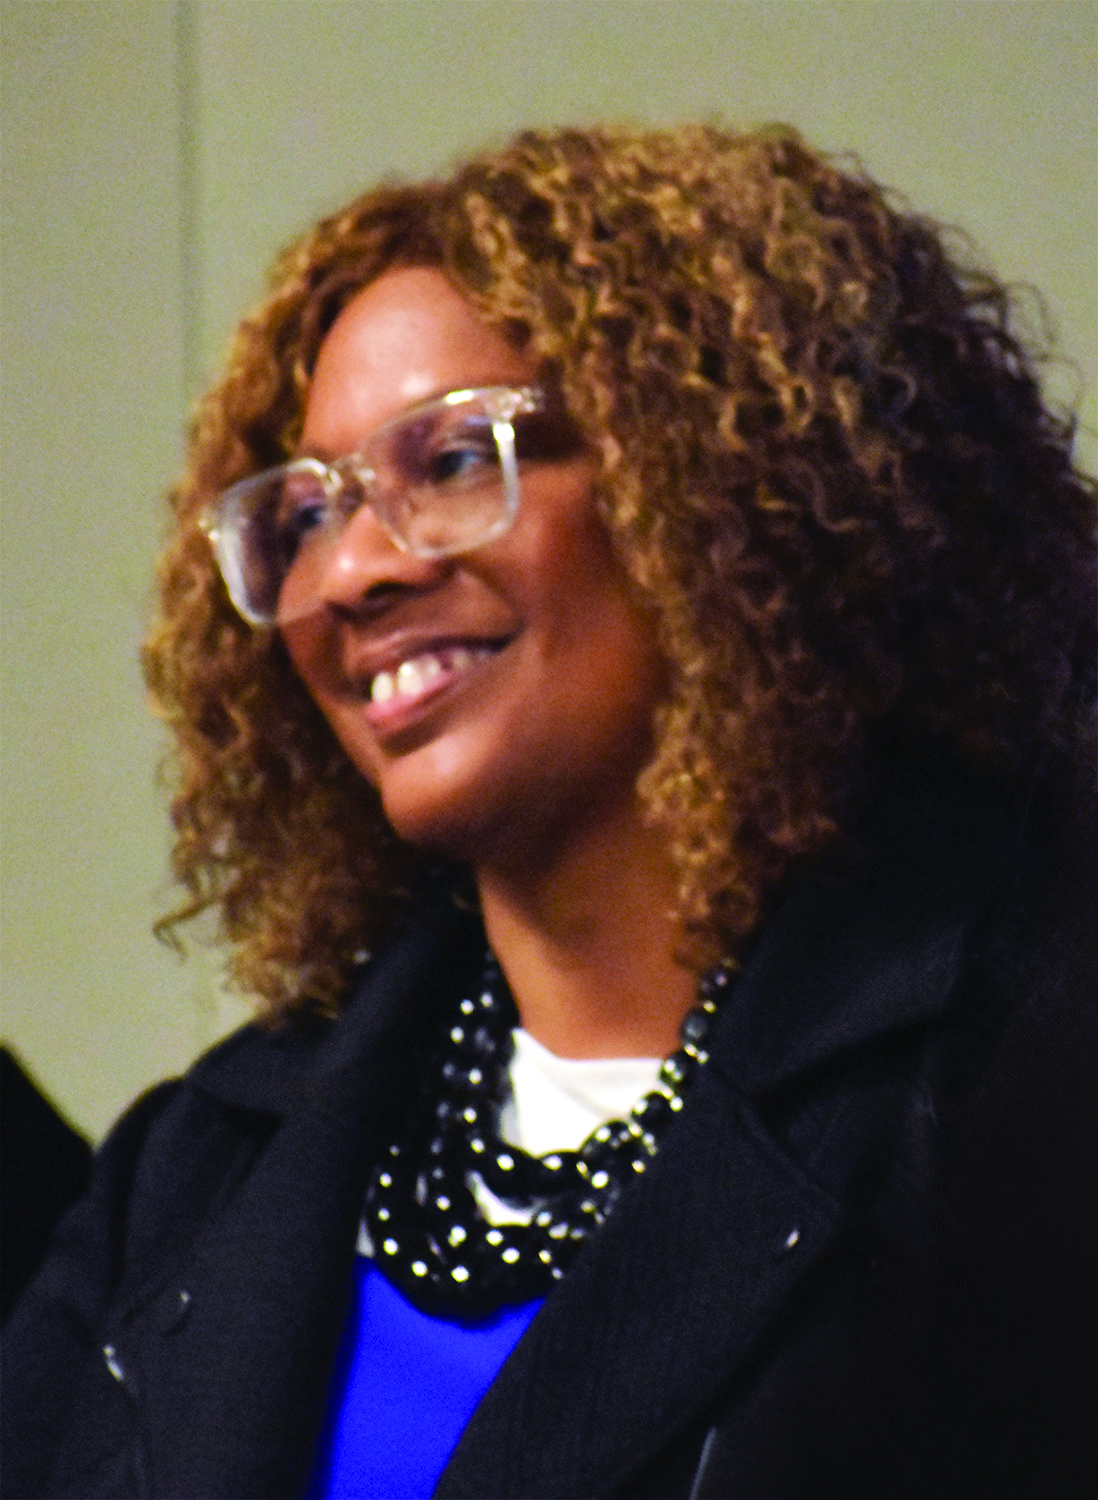 A woman with glasses wearing all black with glasses.